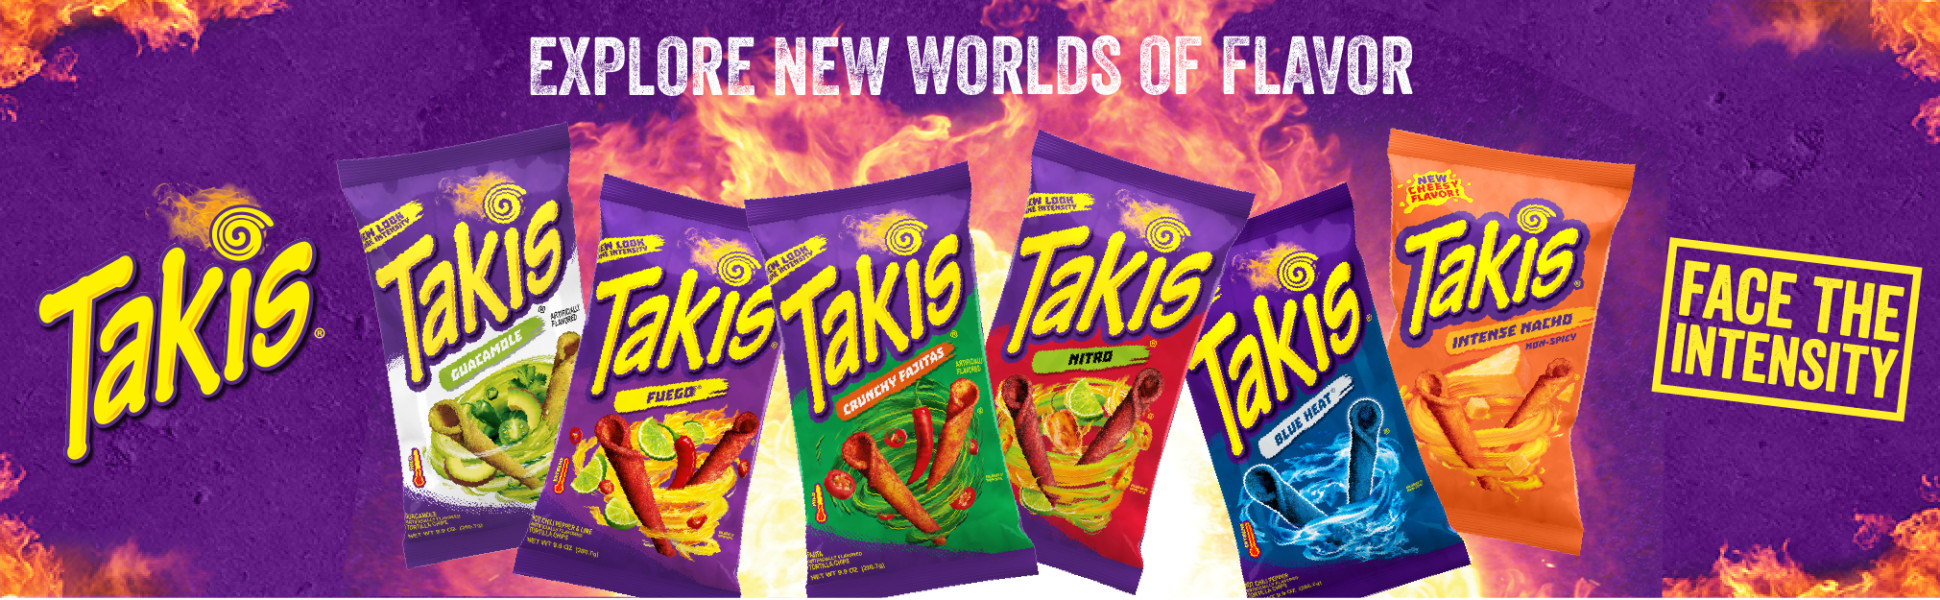 Takis Fuego, 3.25 Ounce (Pack of 40), 1 unit - Fry's Food Stores